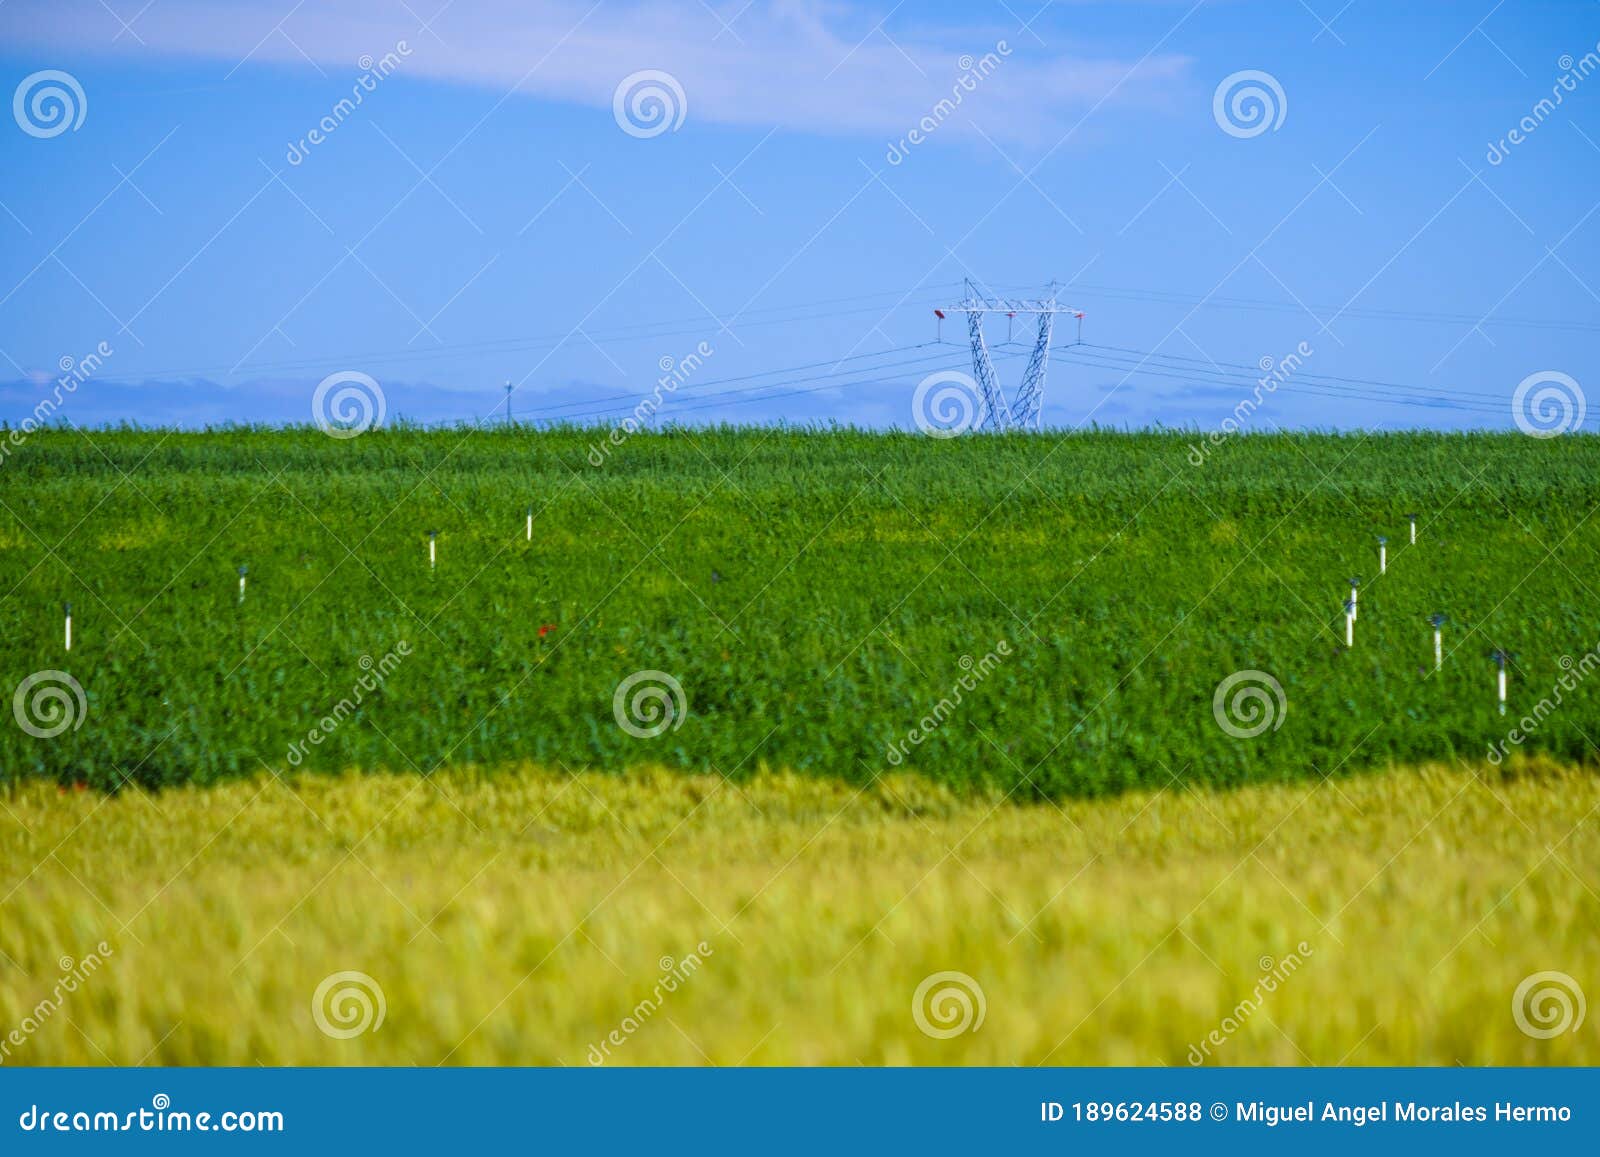 cultivated fields, especially cereals, in the interior spain